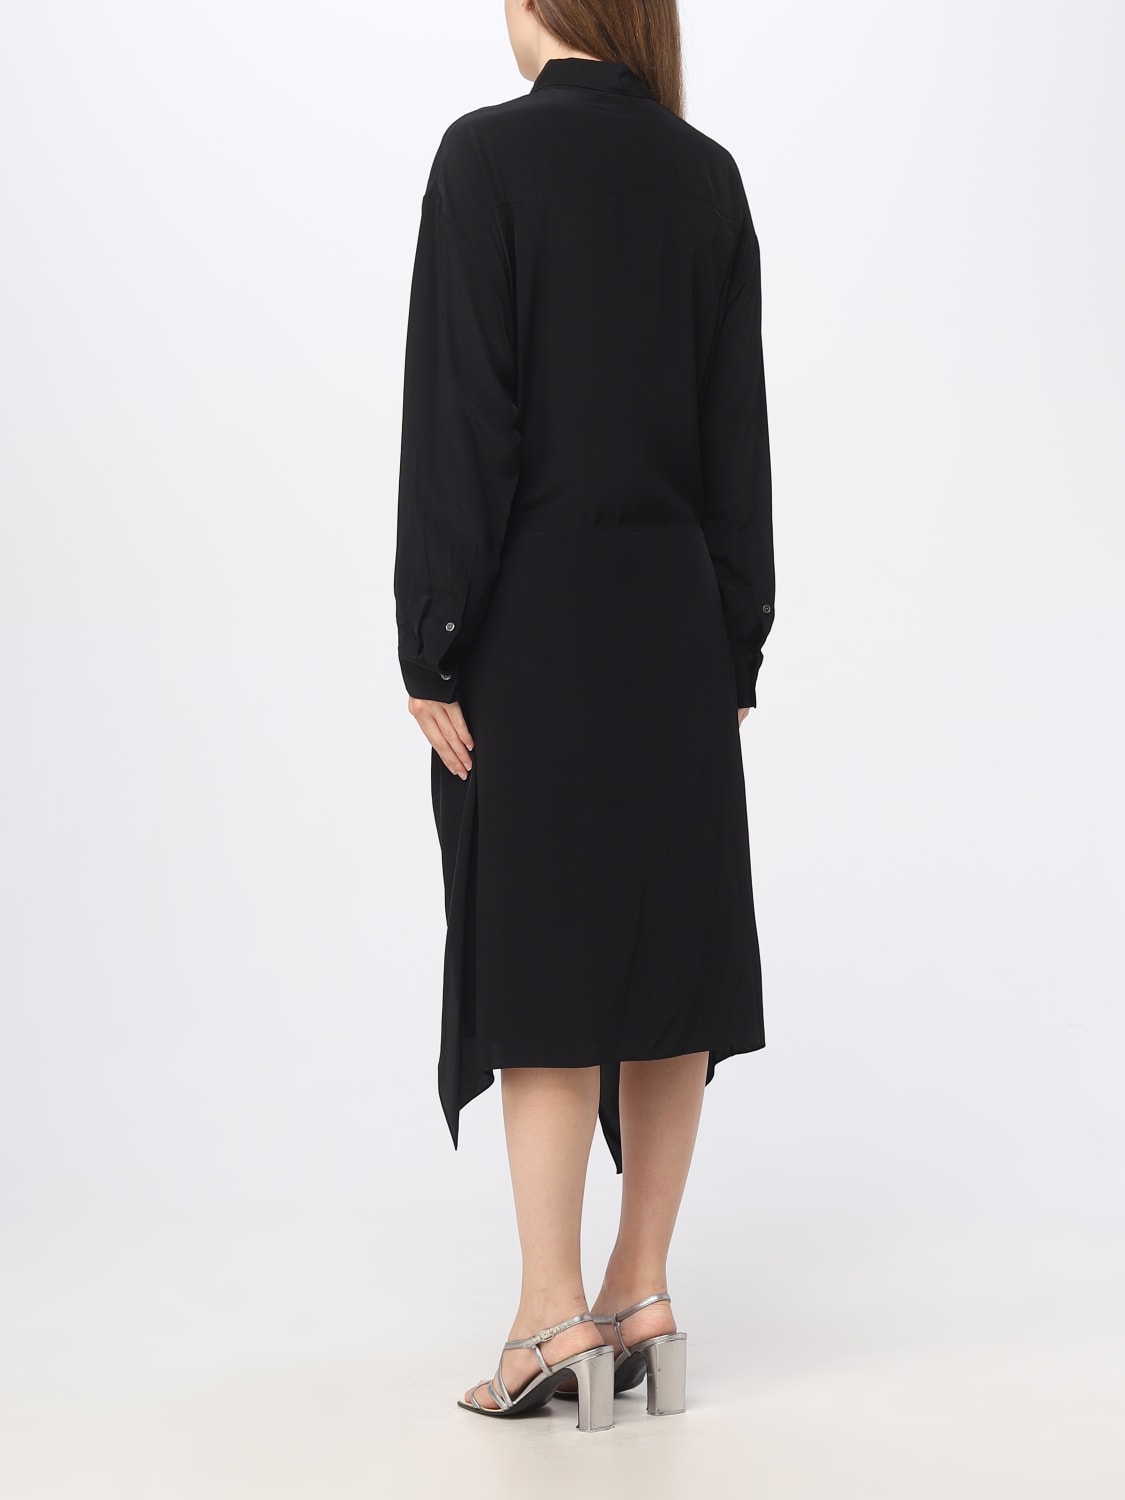 THEORY: dress for woman - Black | Theory dress N0506612 online on ...